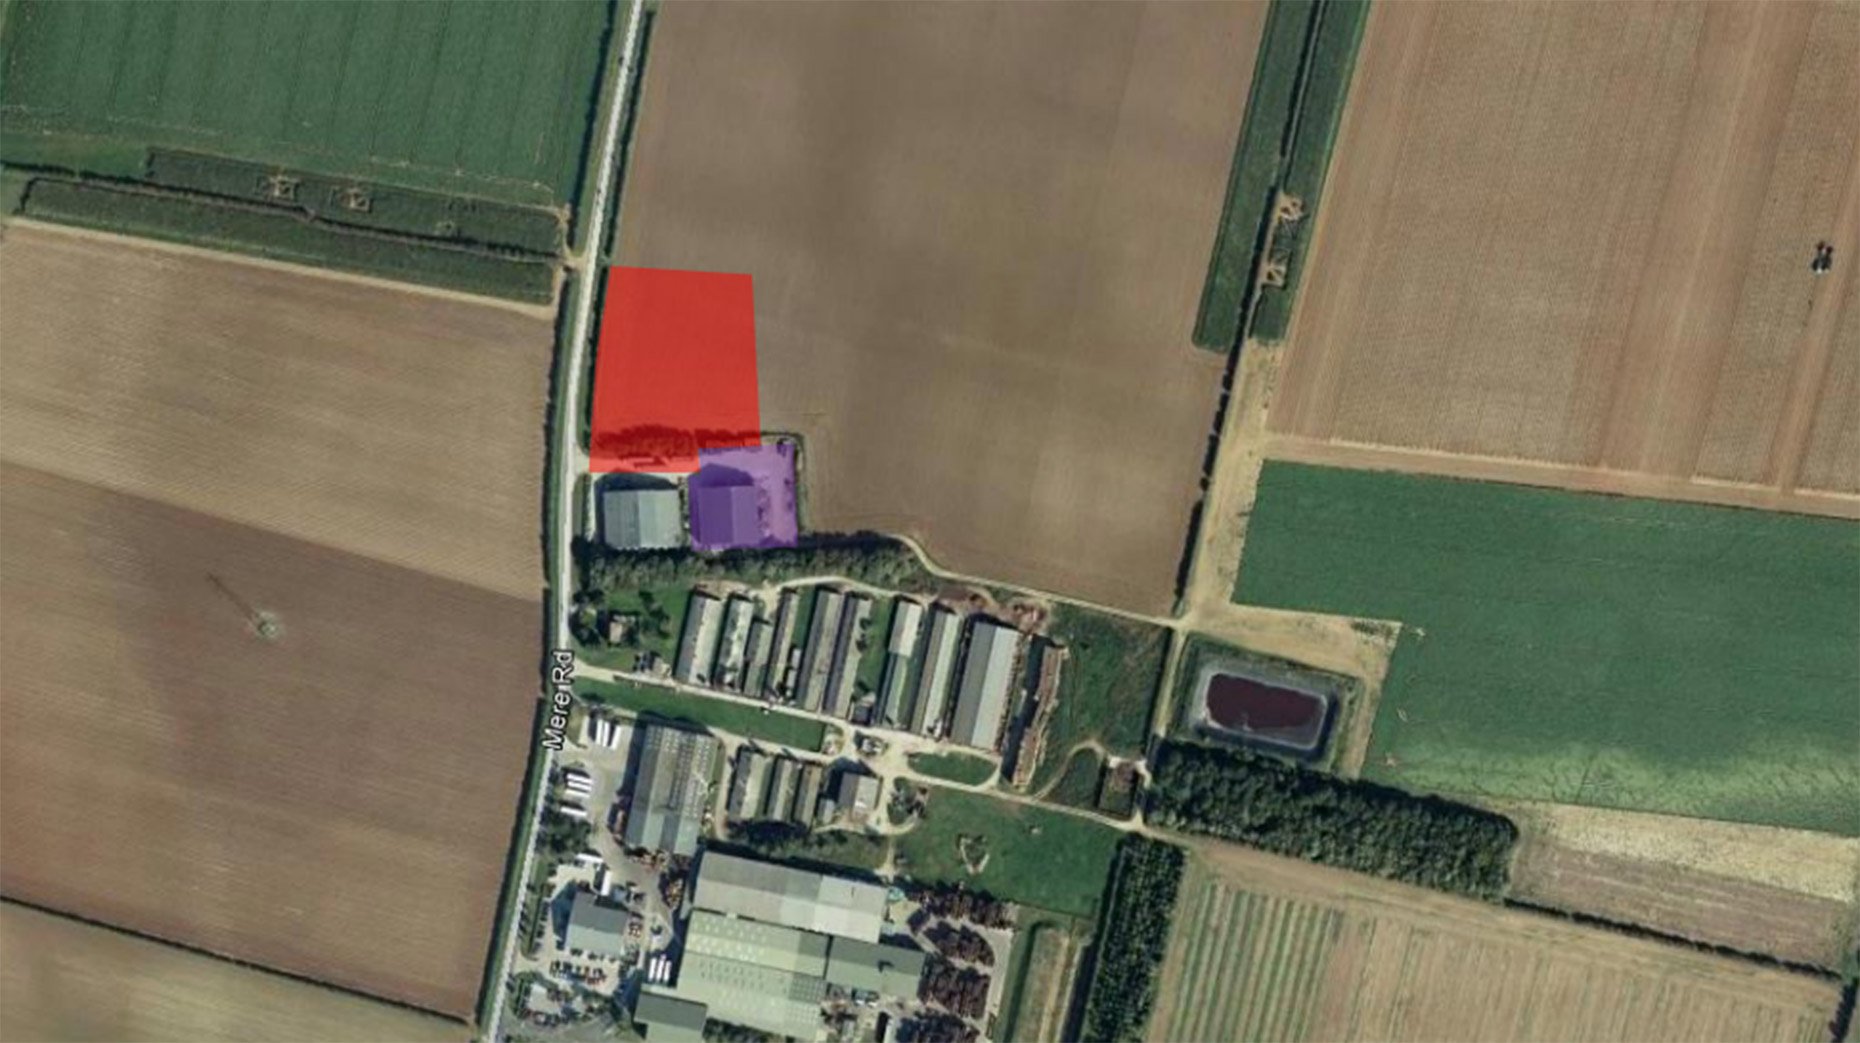 The units are planned to be constructed on land off Mere Road, adjacent to Branston Potatoes Ltd. Photo: Google Earth